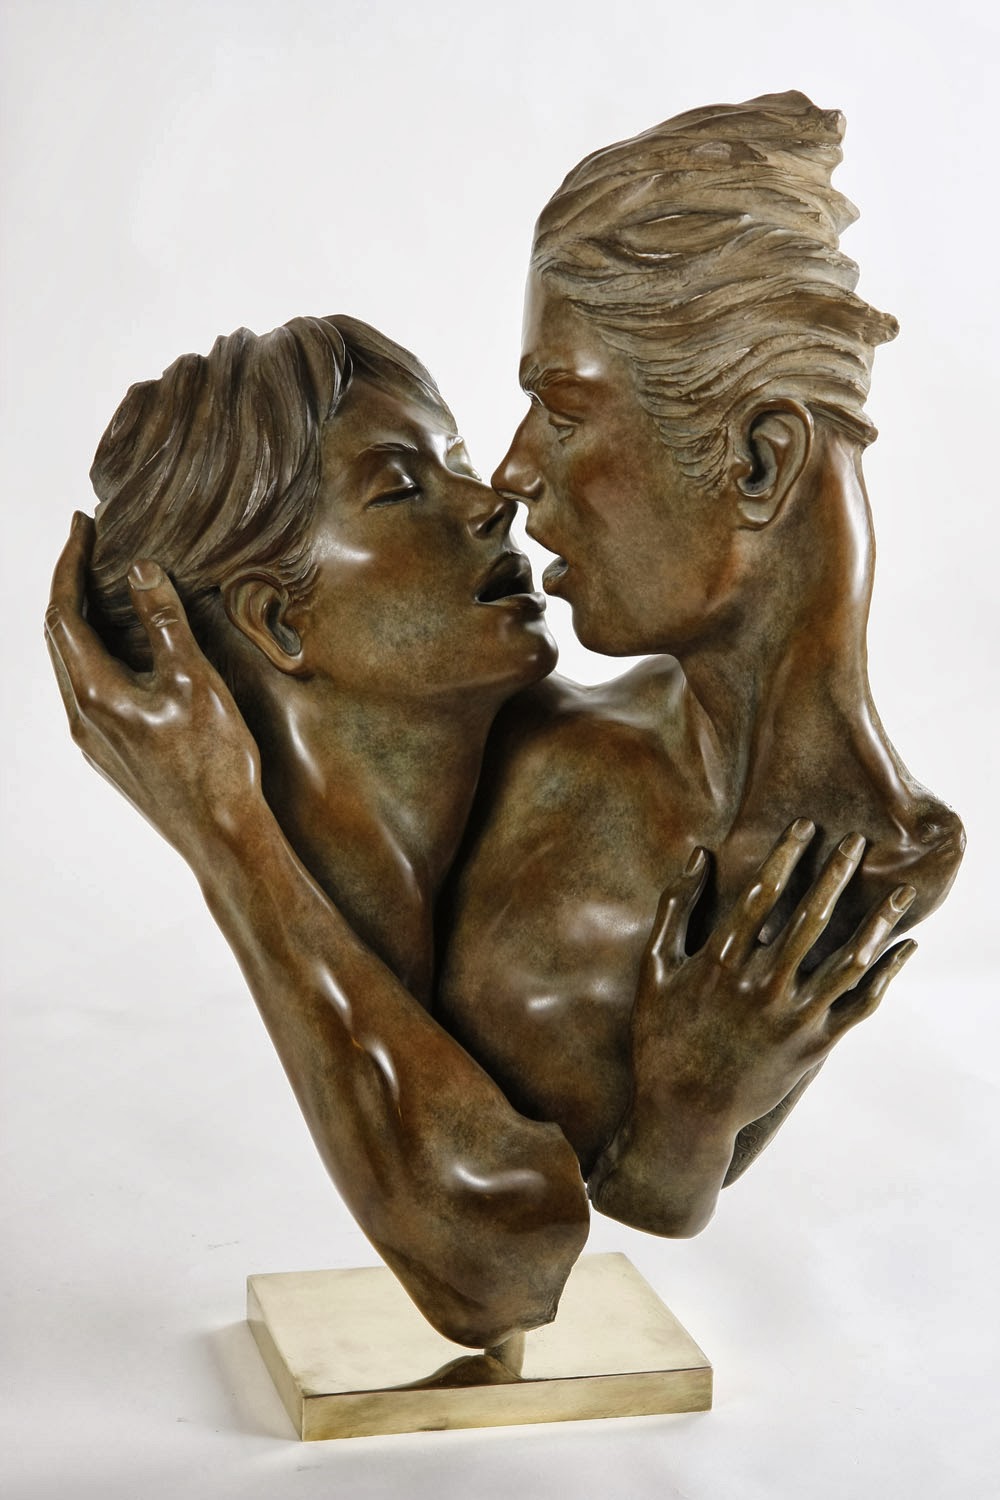 Yves Pires - French sculptor